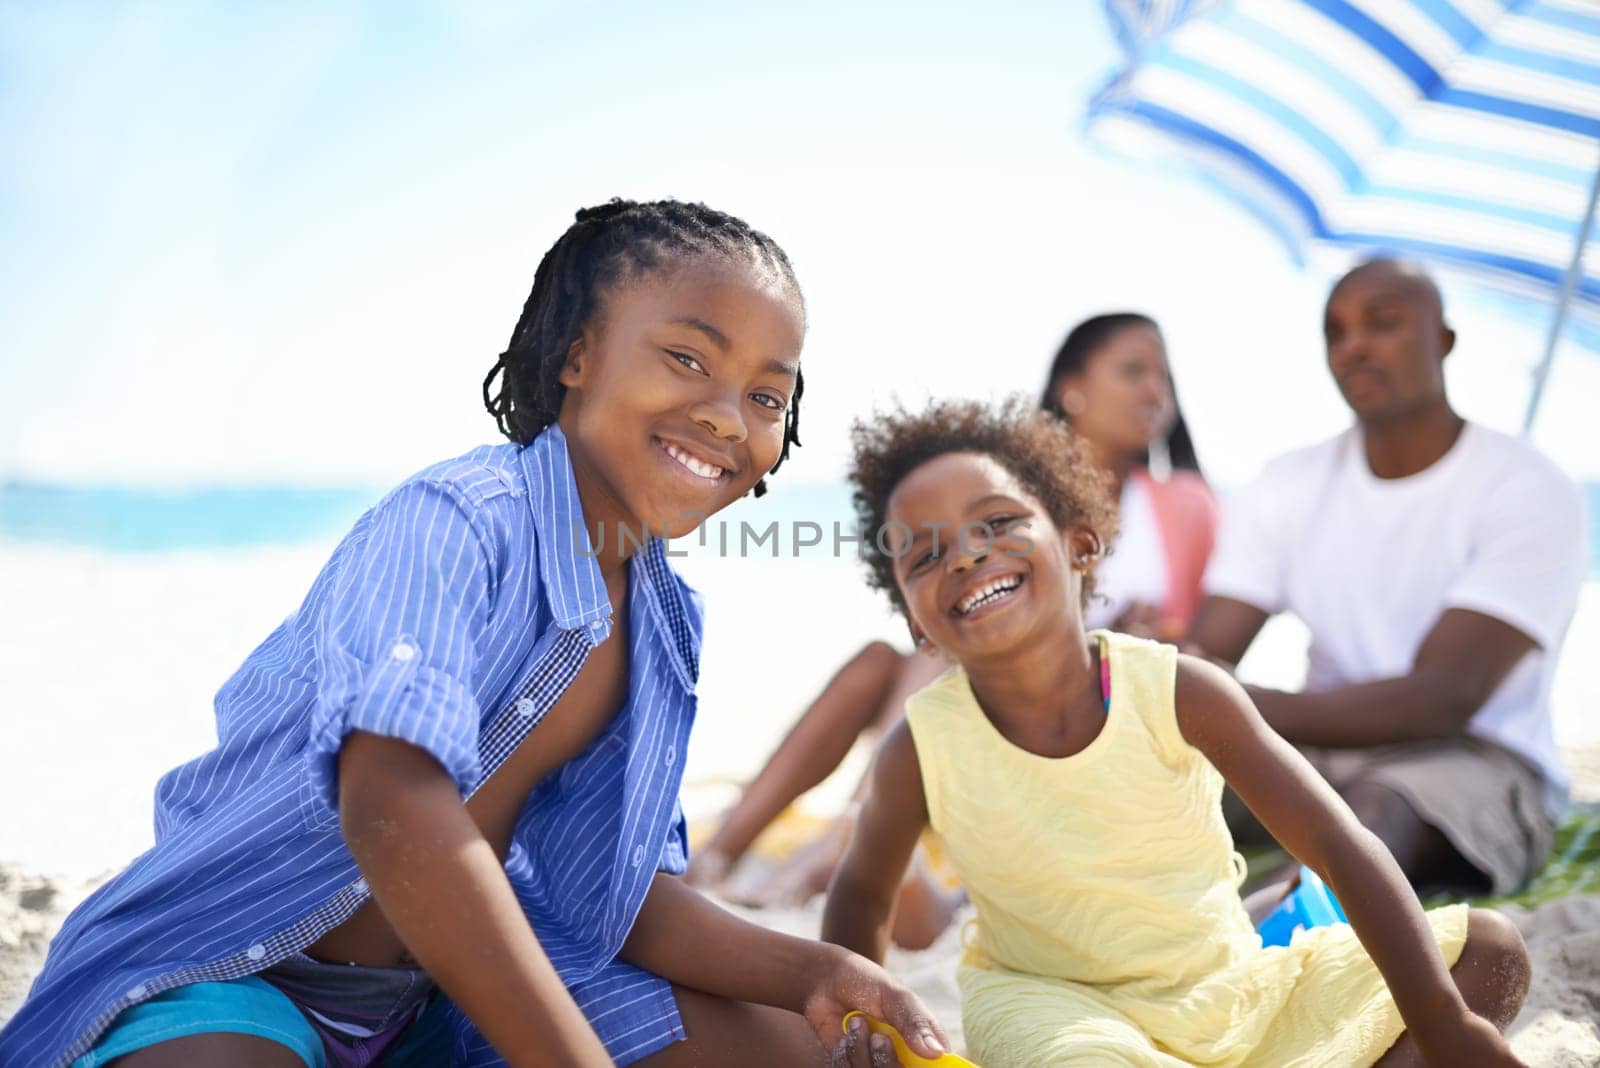 African family, parents or children and happy at beach for adventure, holiday or vacation in summer. African people, face and smile outdoor in nature for break, experience or bonding and relationship.